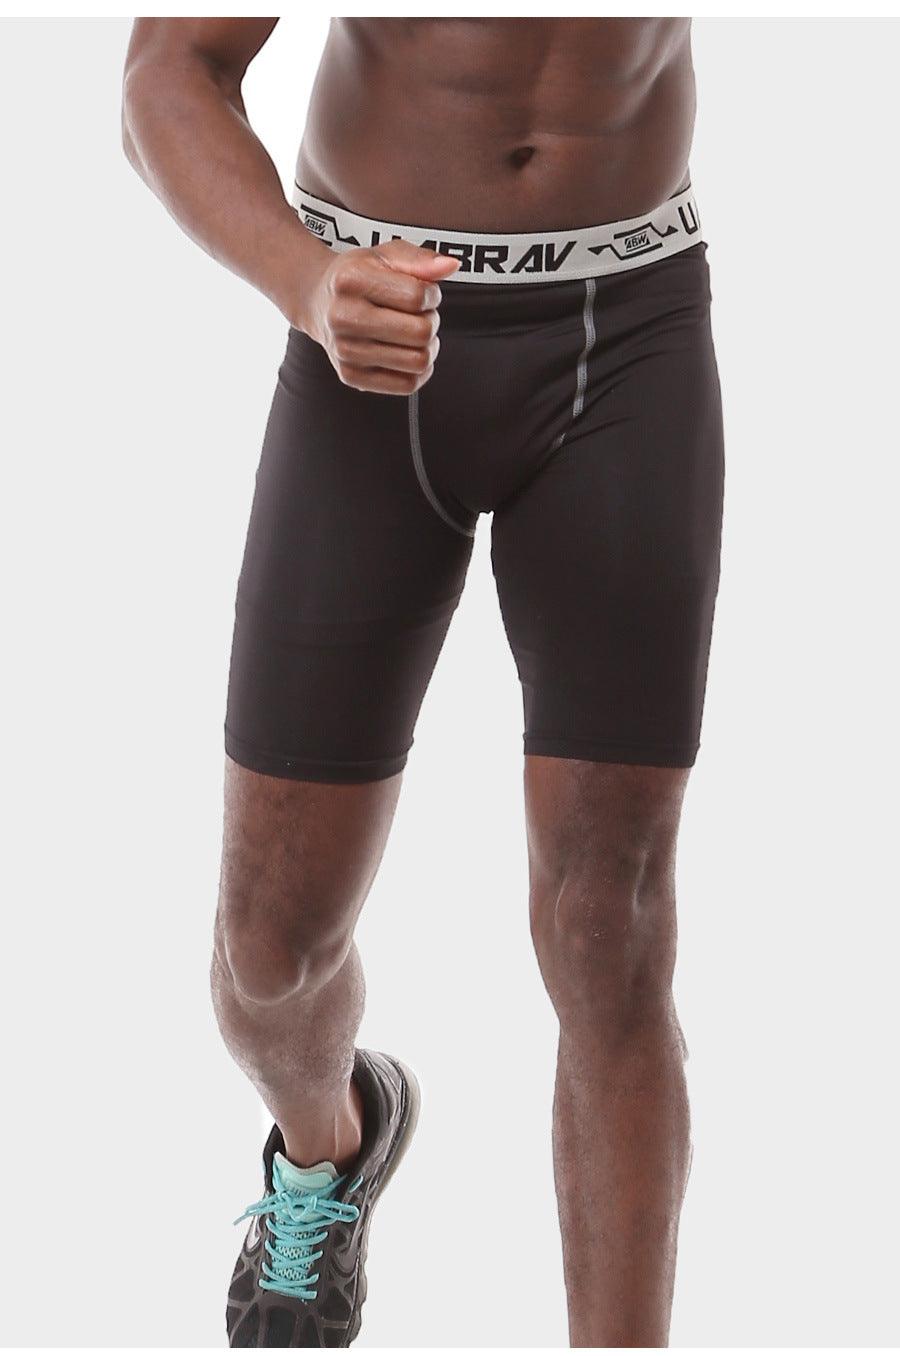 Sports Tight Shorts High Elastic Pro Running Stretch Workout Pants - Nioor